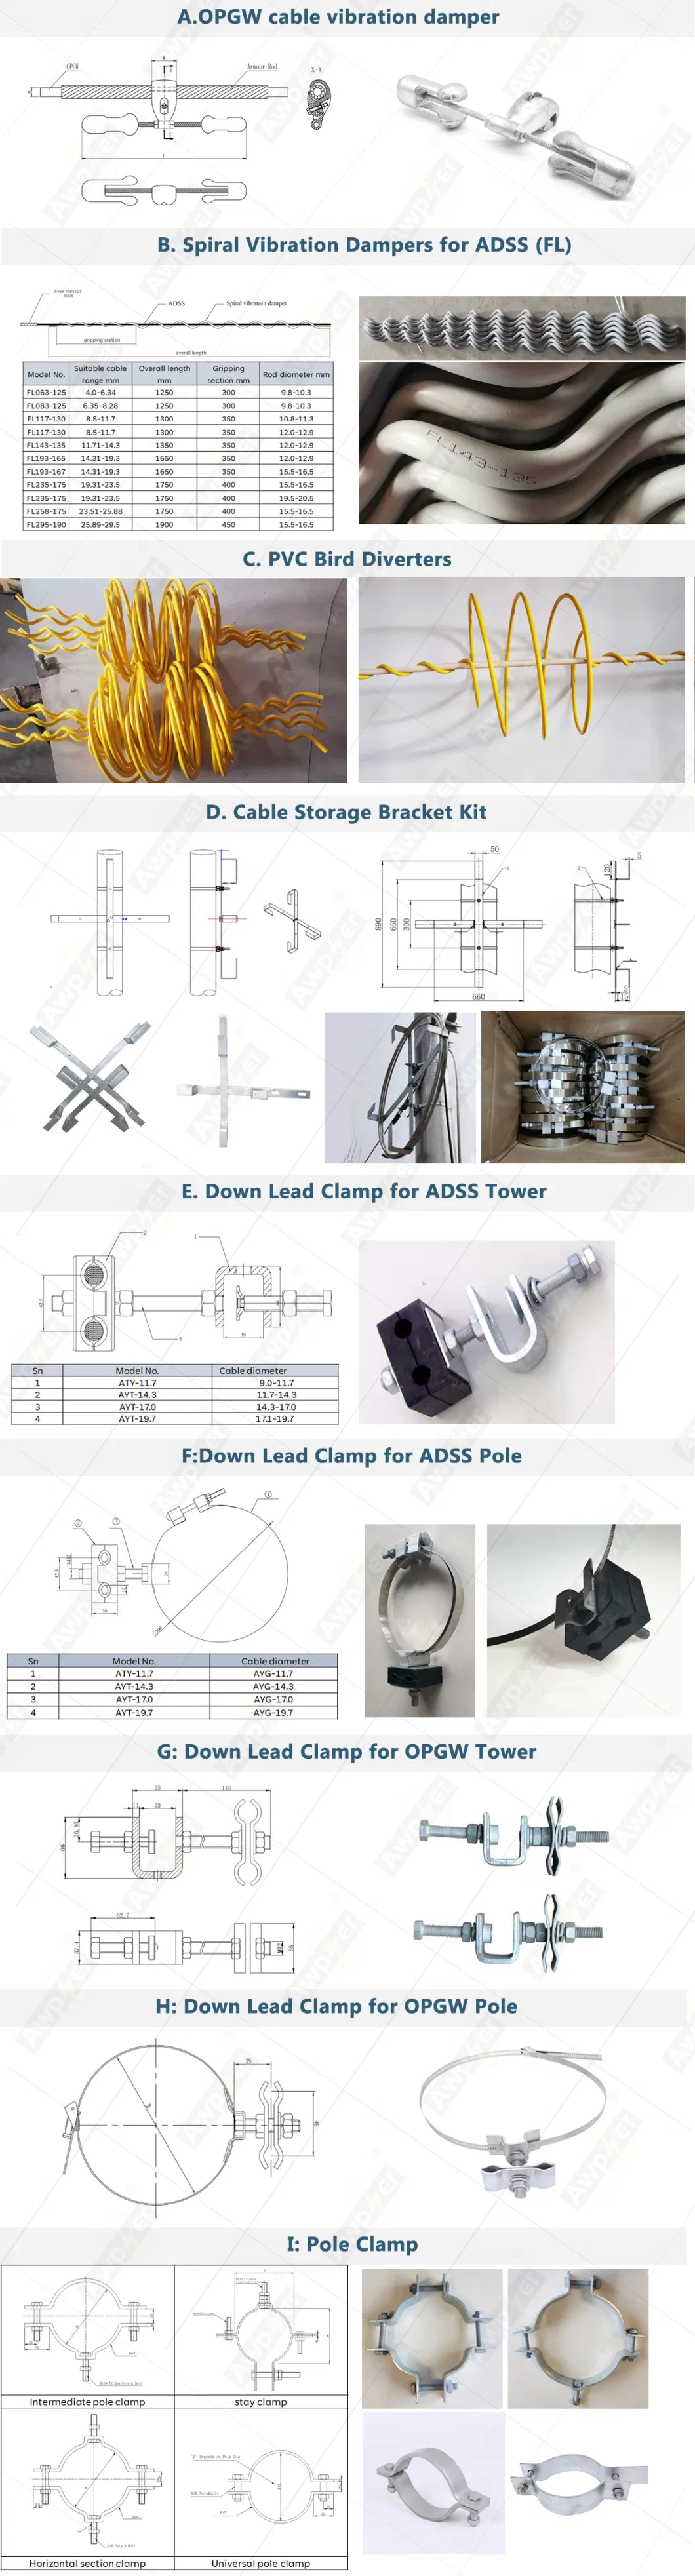 Opgw ADSS Cable Clamps Galvanized Steel Down Lead Clamp for Pole/Tower Use